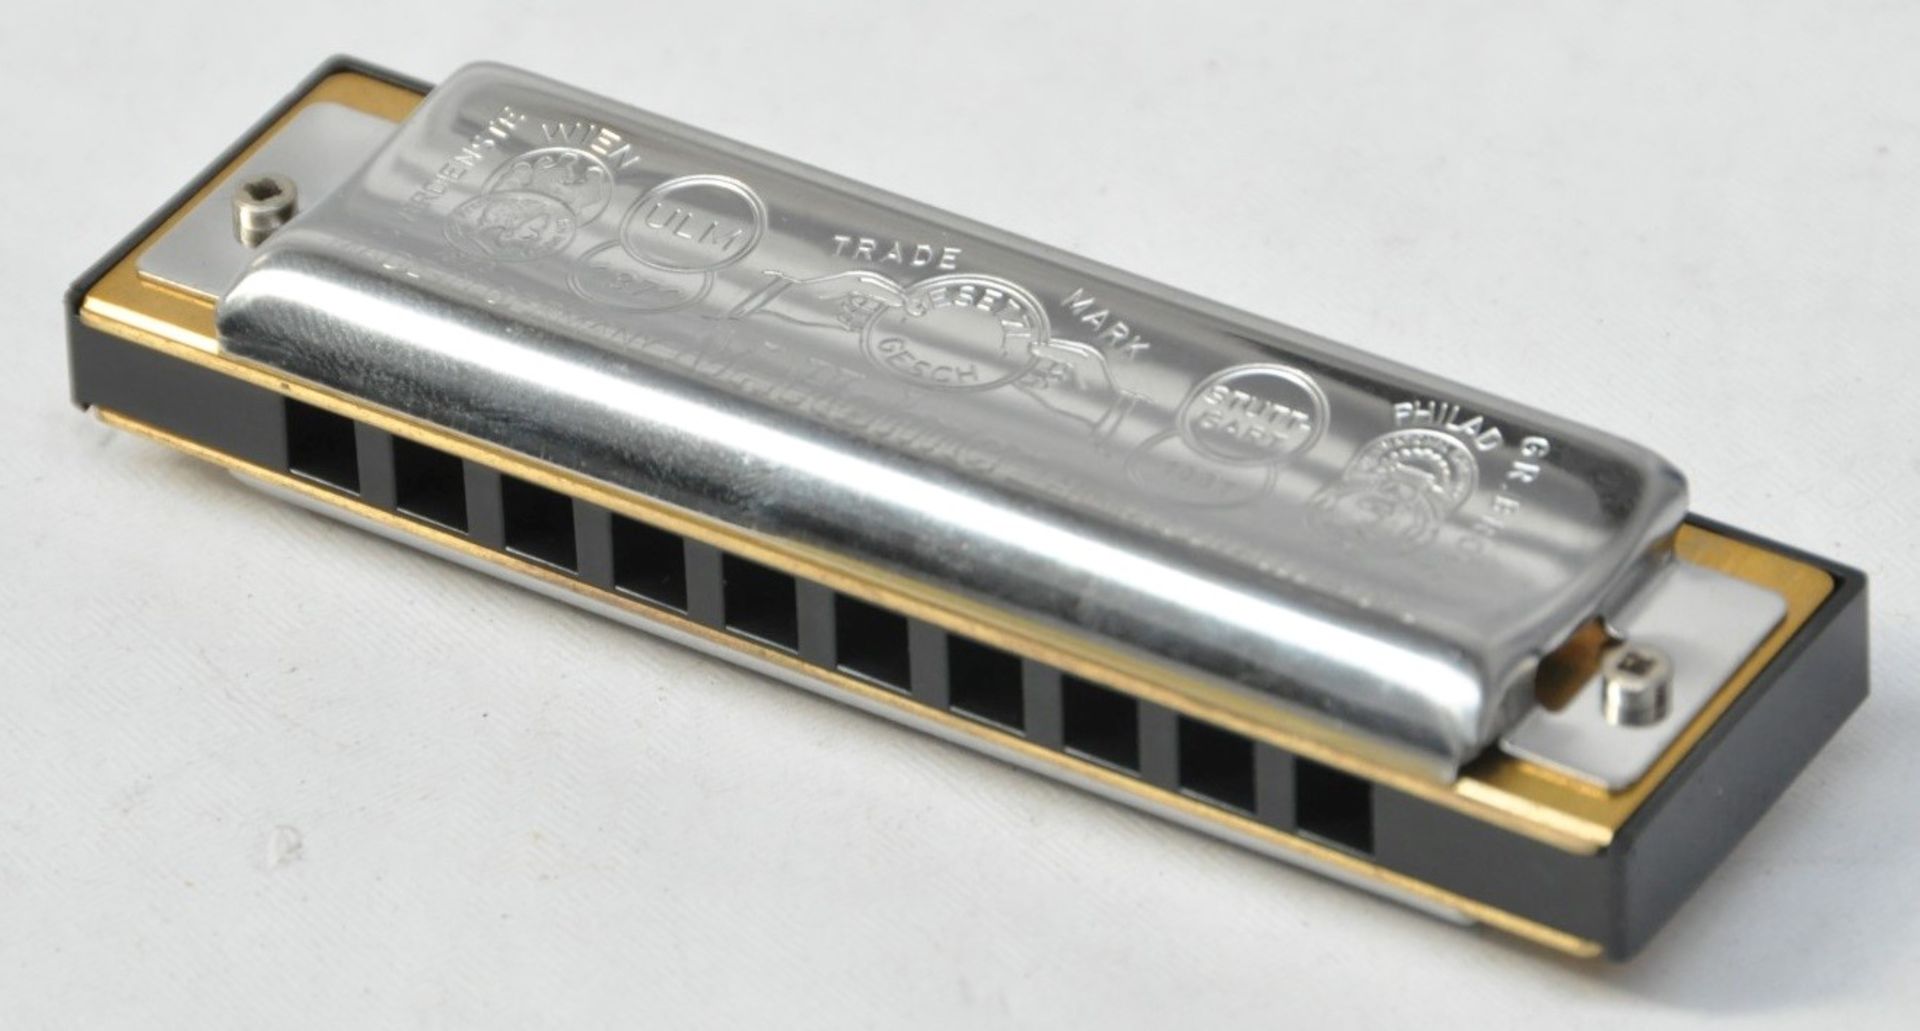 1 x Hohner Big River Harp Mouth Harmonica - Made in Germany - Key F - CL020 - Unused Stock With Case - Image 4 of 5